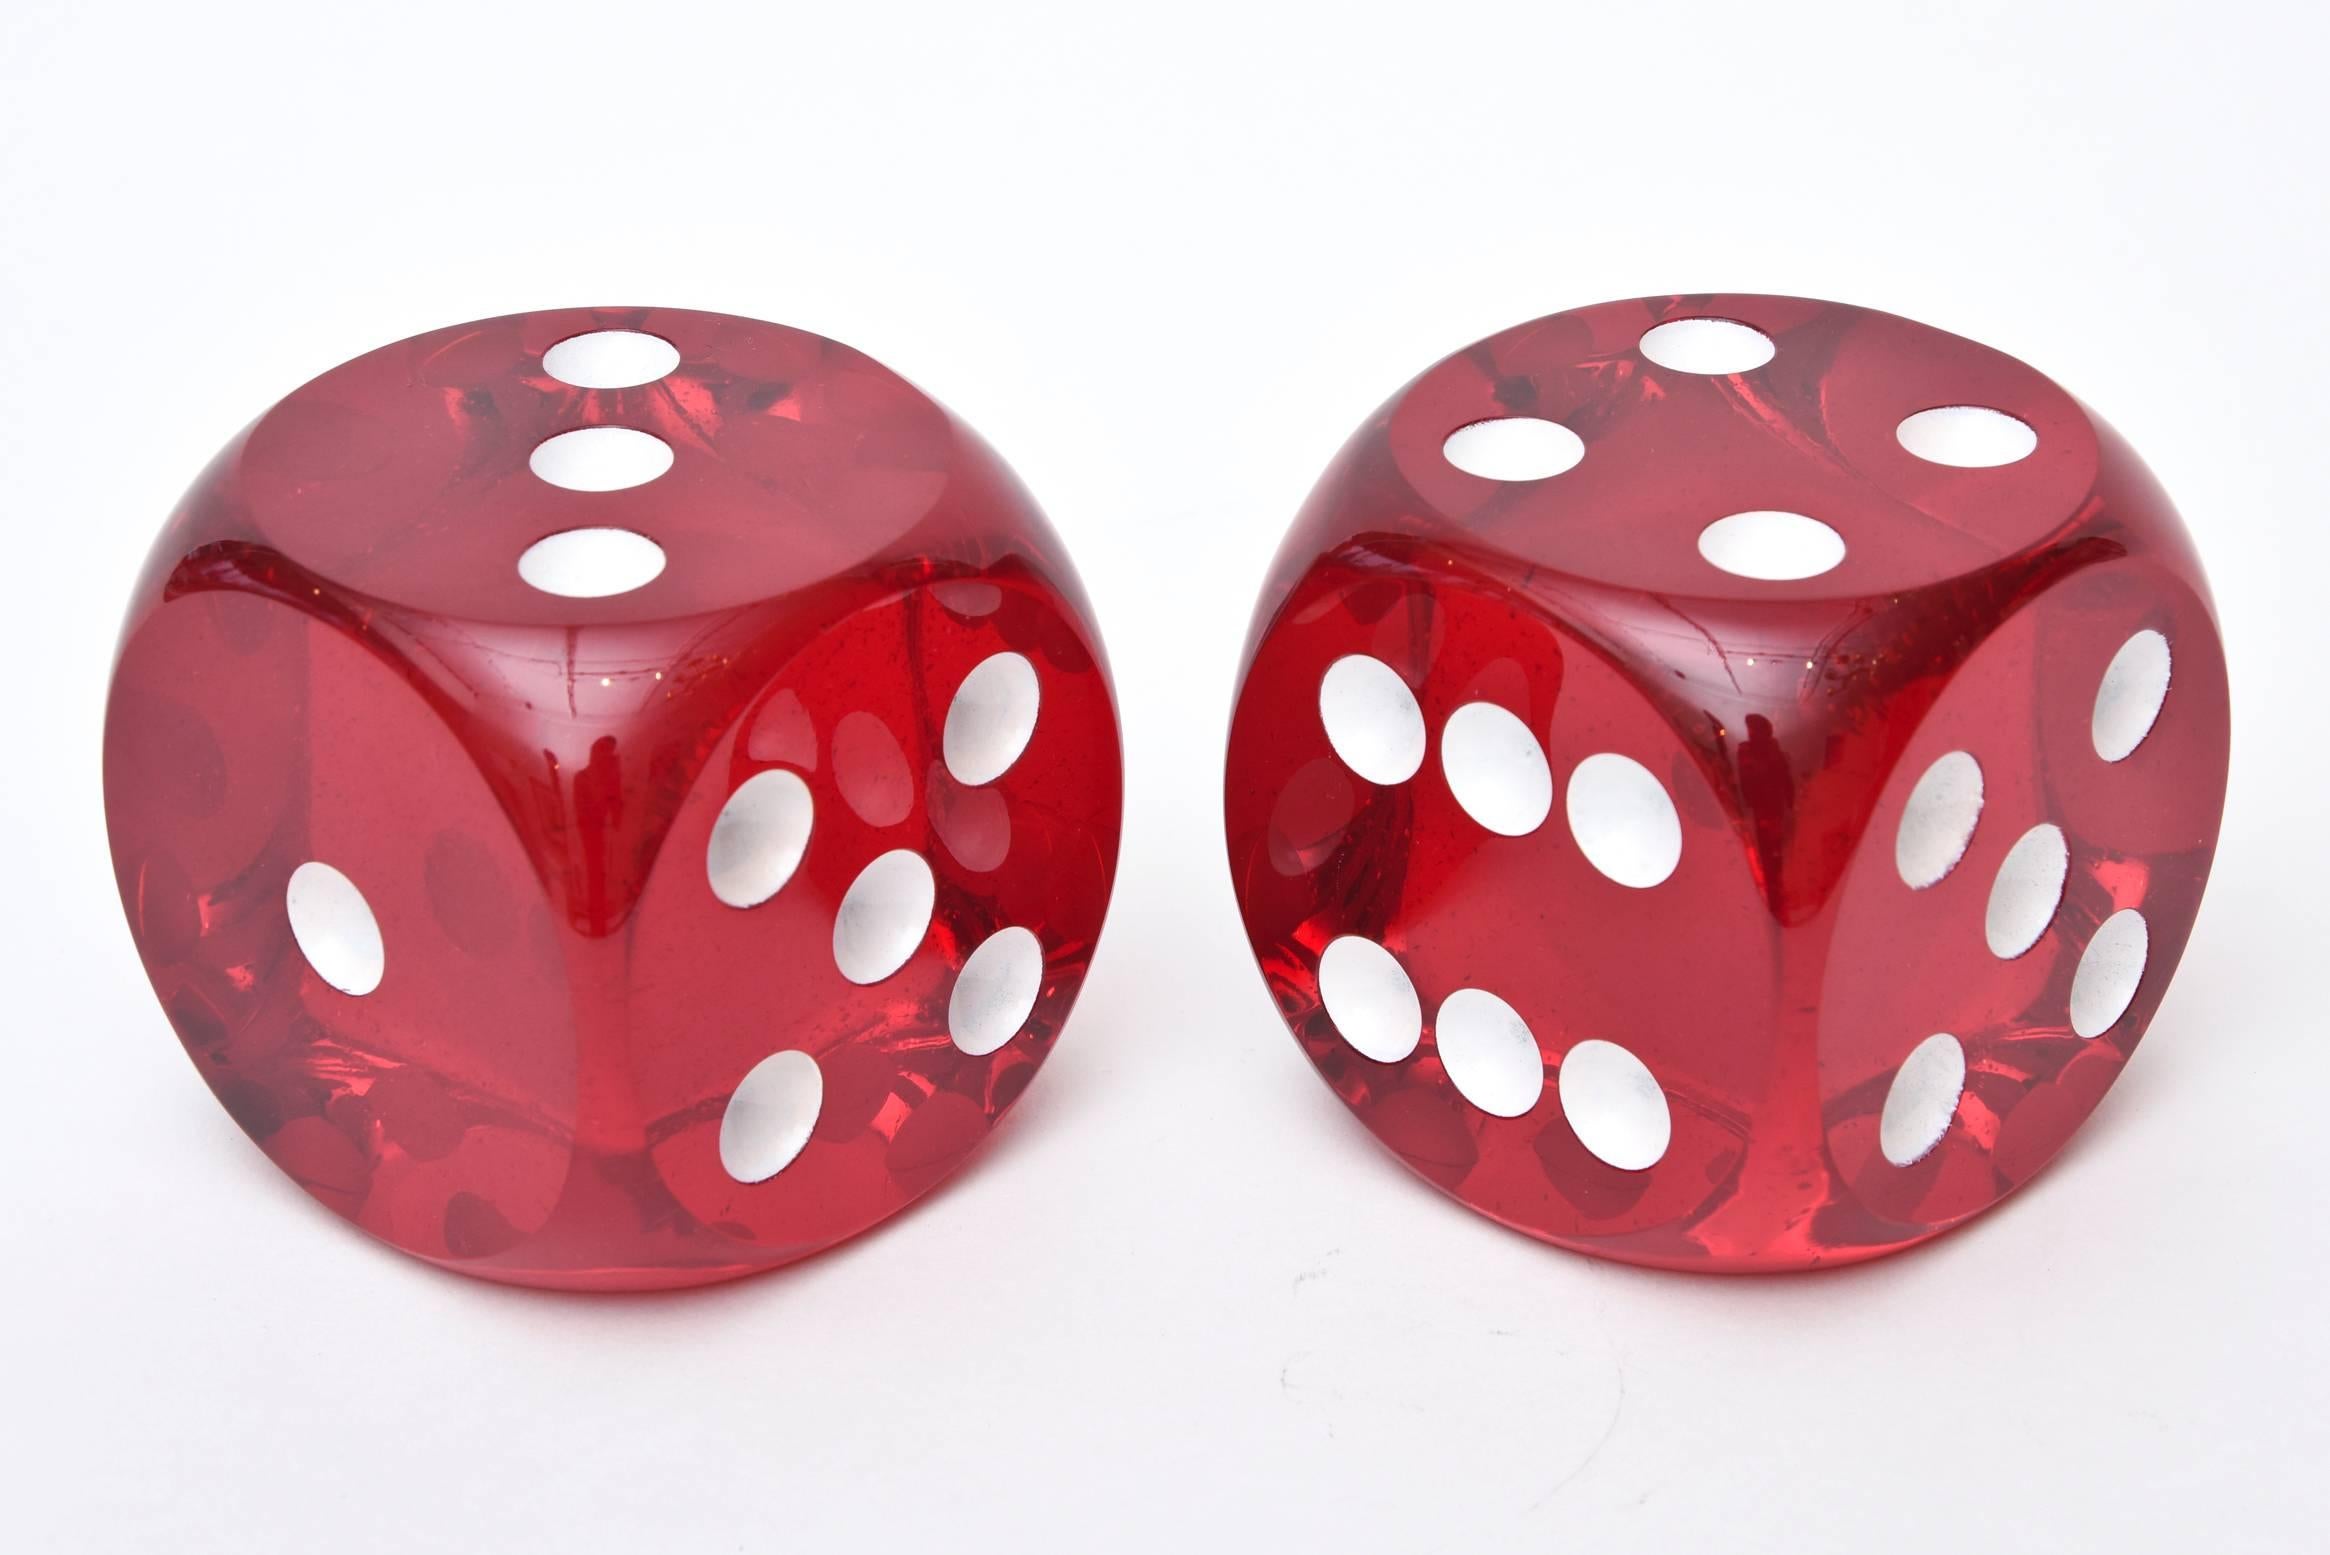 These arresting pair of red bakelite Mid-Century dice certainly make a statement in any place or room. They are large and bring theater to any setting.
Their dots are white and they have been polished.

They act as sculptures and art. Sold as a pair